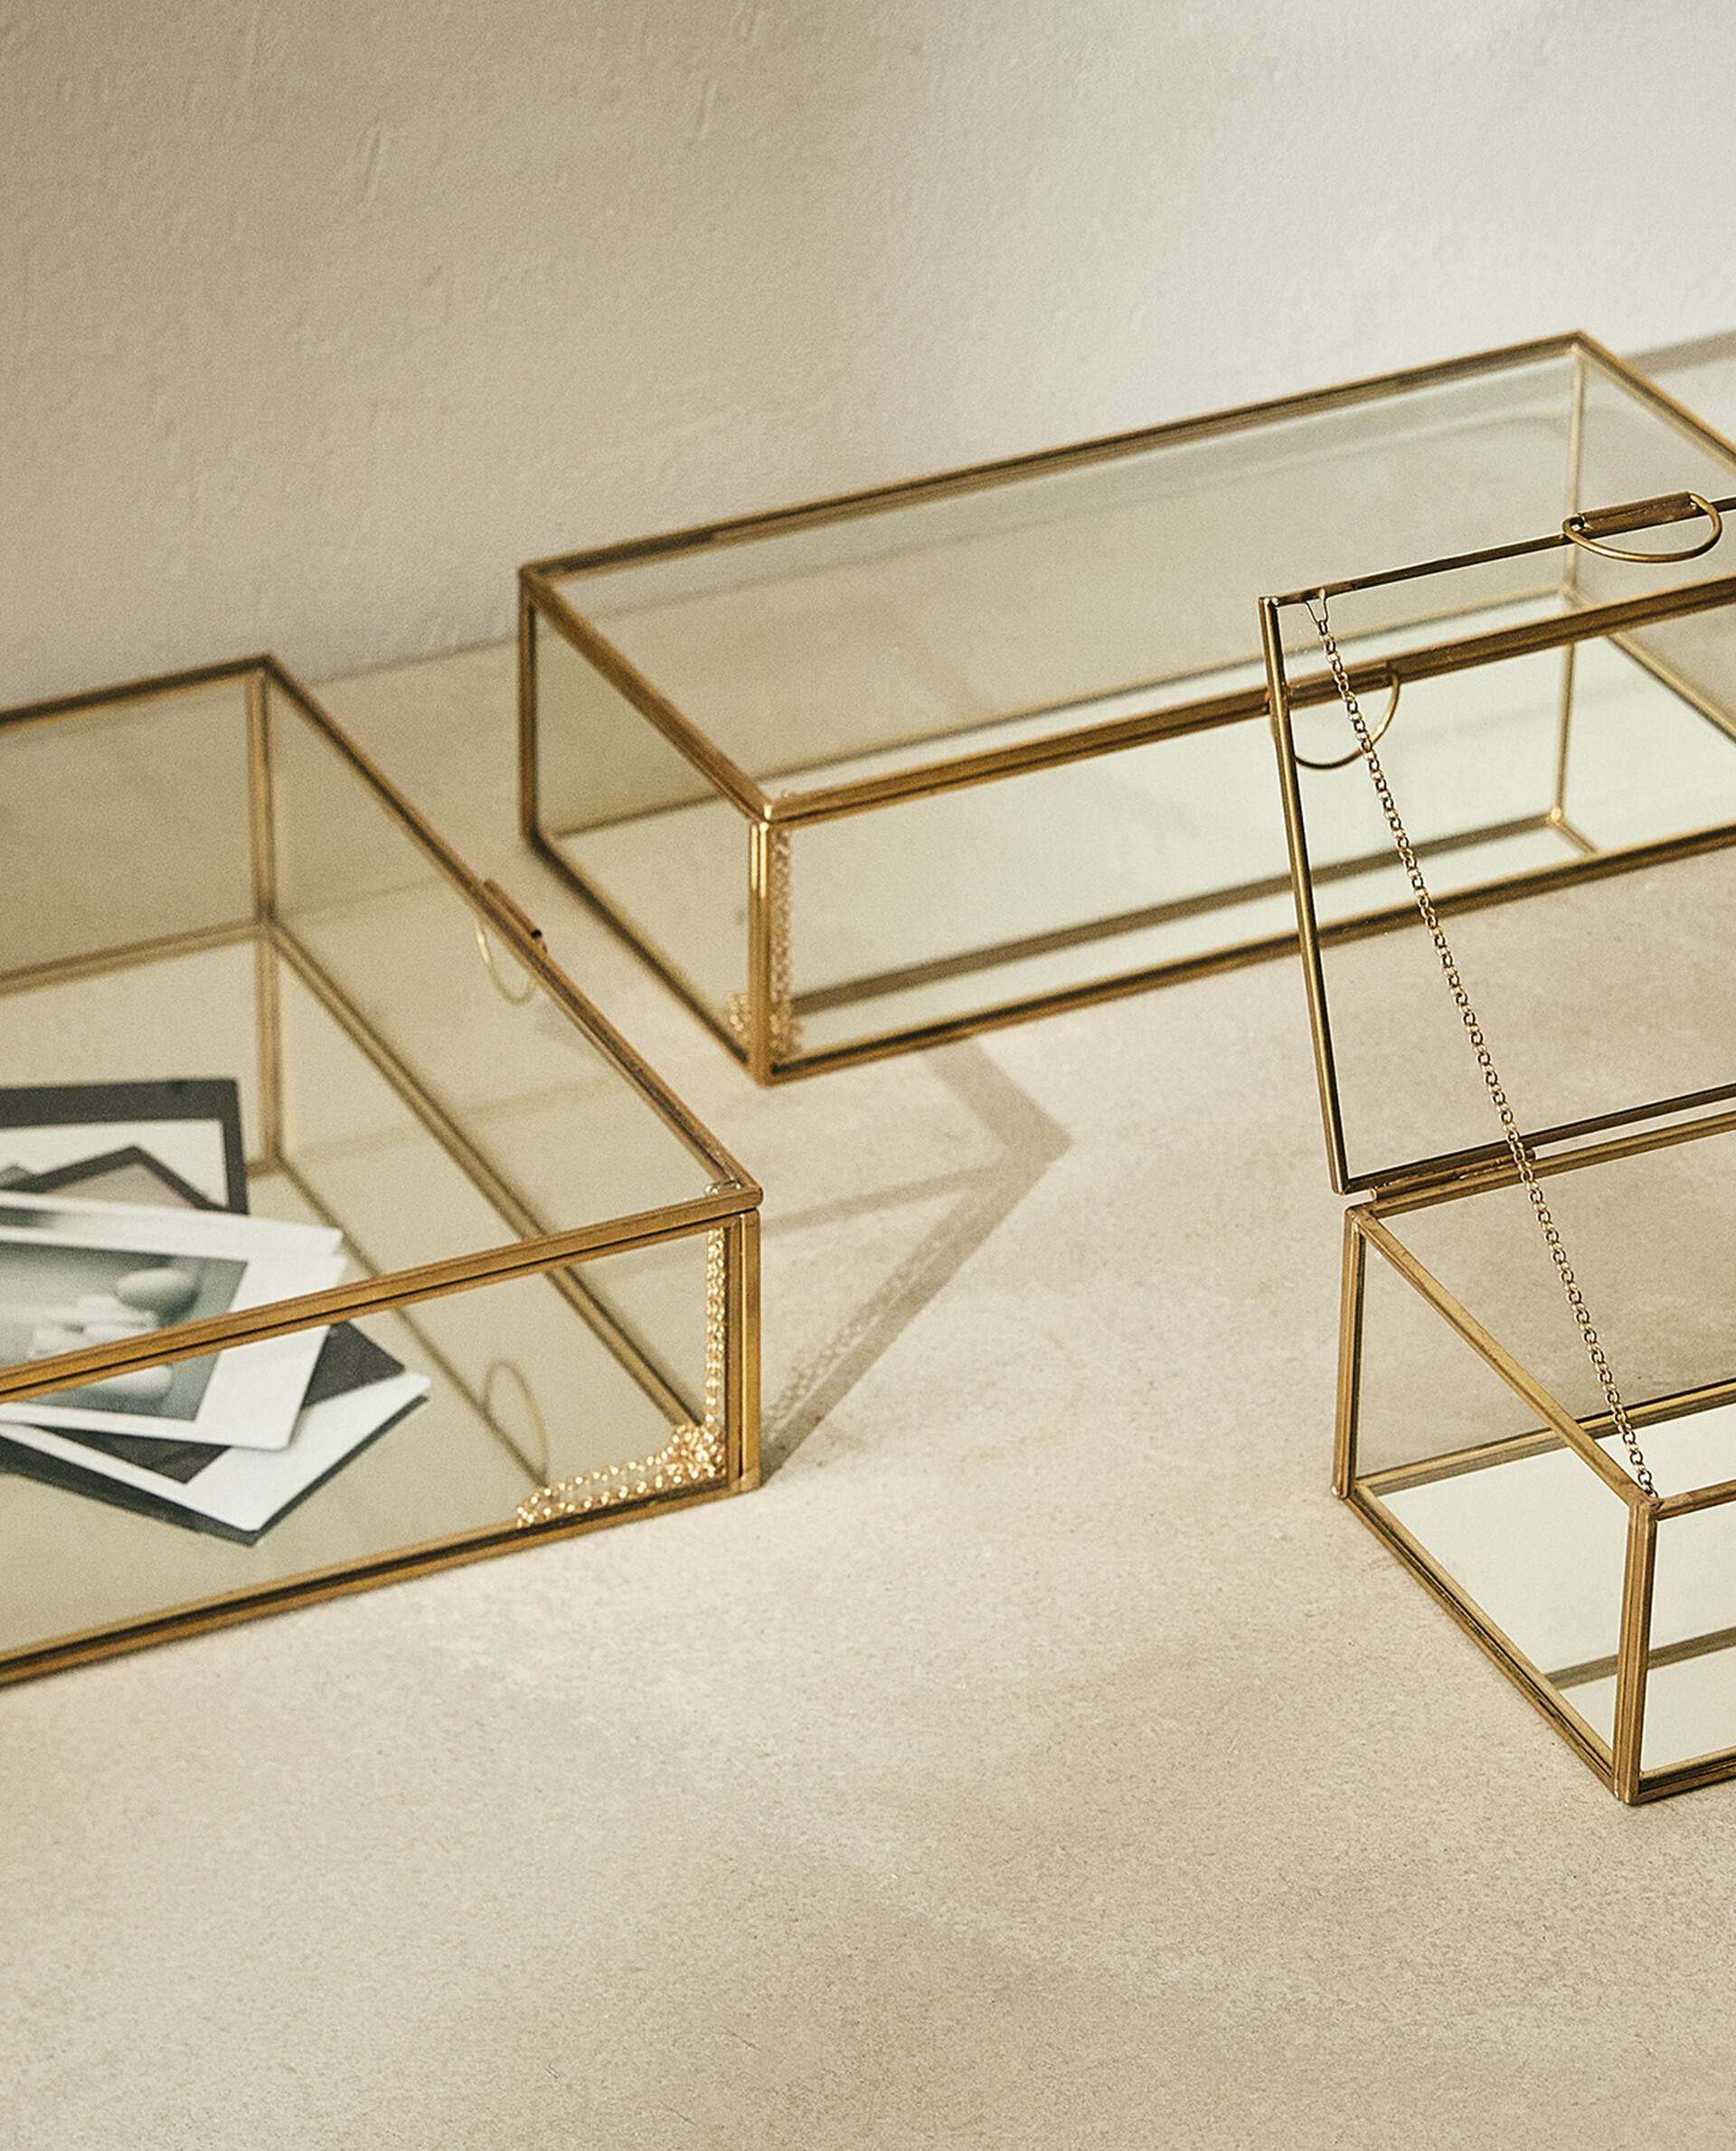 GLASS BOX WITH METAL FRAME - BOXES - LIVING ROOM | Zara Home Indonesia